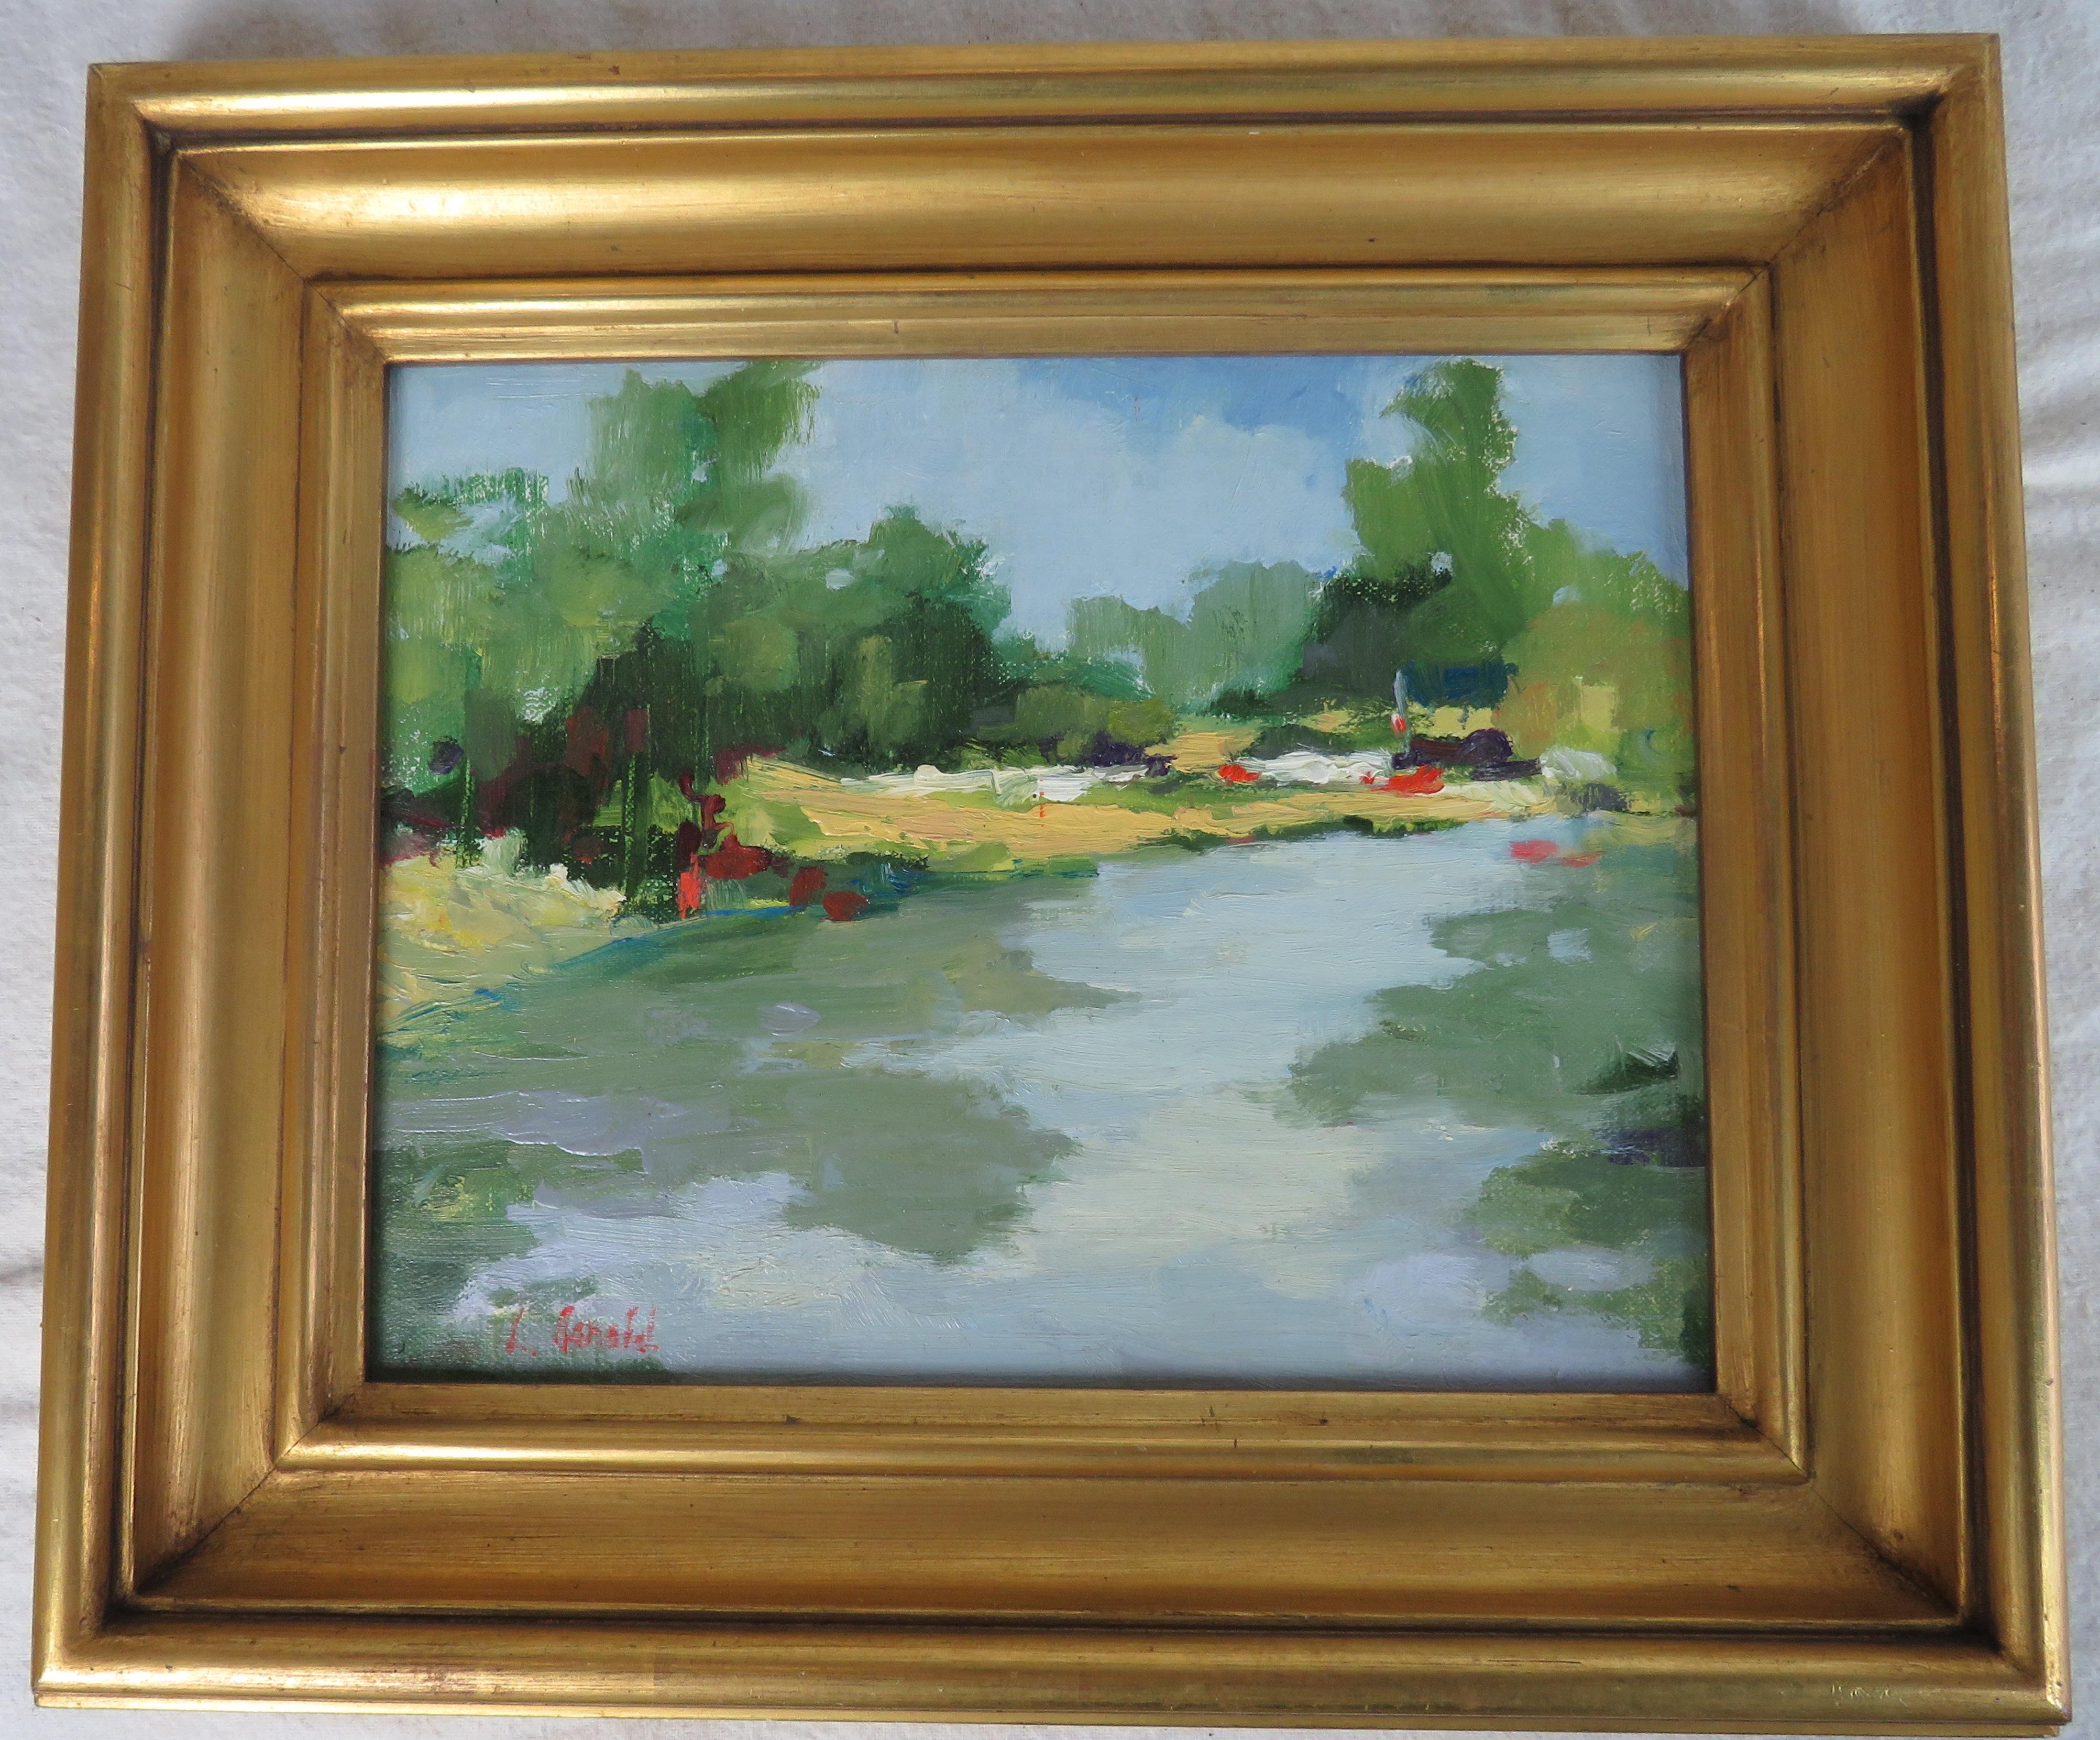 Lovely framed oil on artist's board (8 x 10) of a sunlit bank along a waterway with trees in the background, vibrant use of colors in an abstract approach. Signed lower left, L. Arnold.

From the Artist's Biography:
Linda Arnold is an award-winning